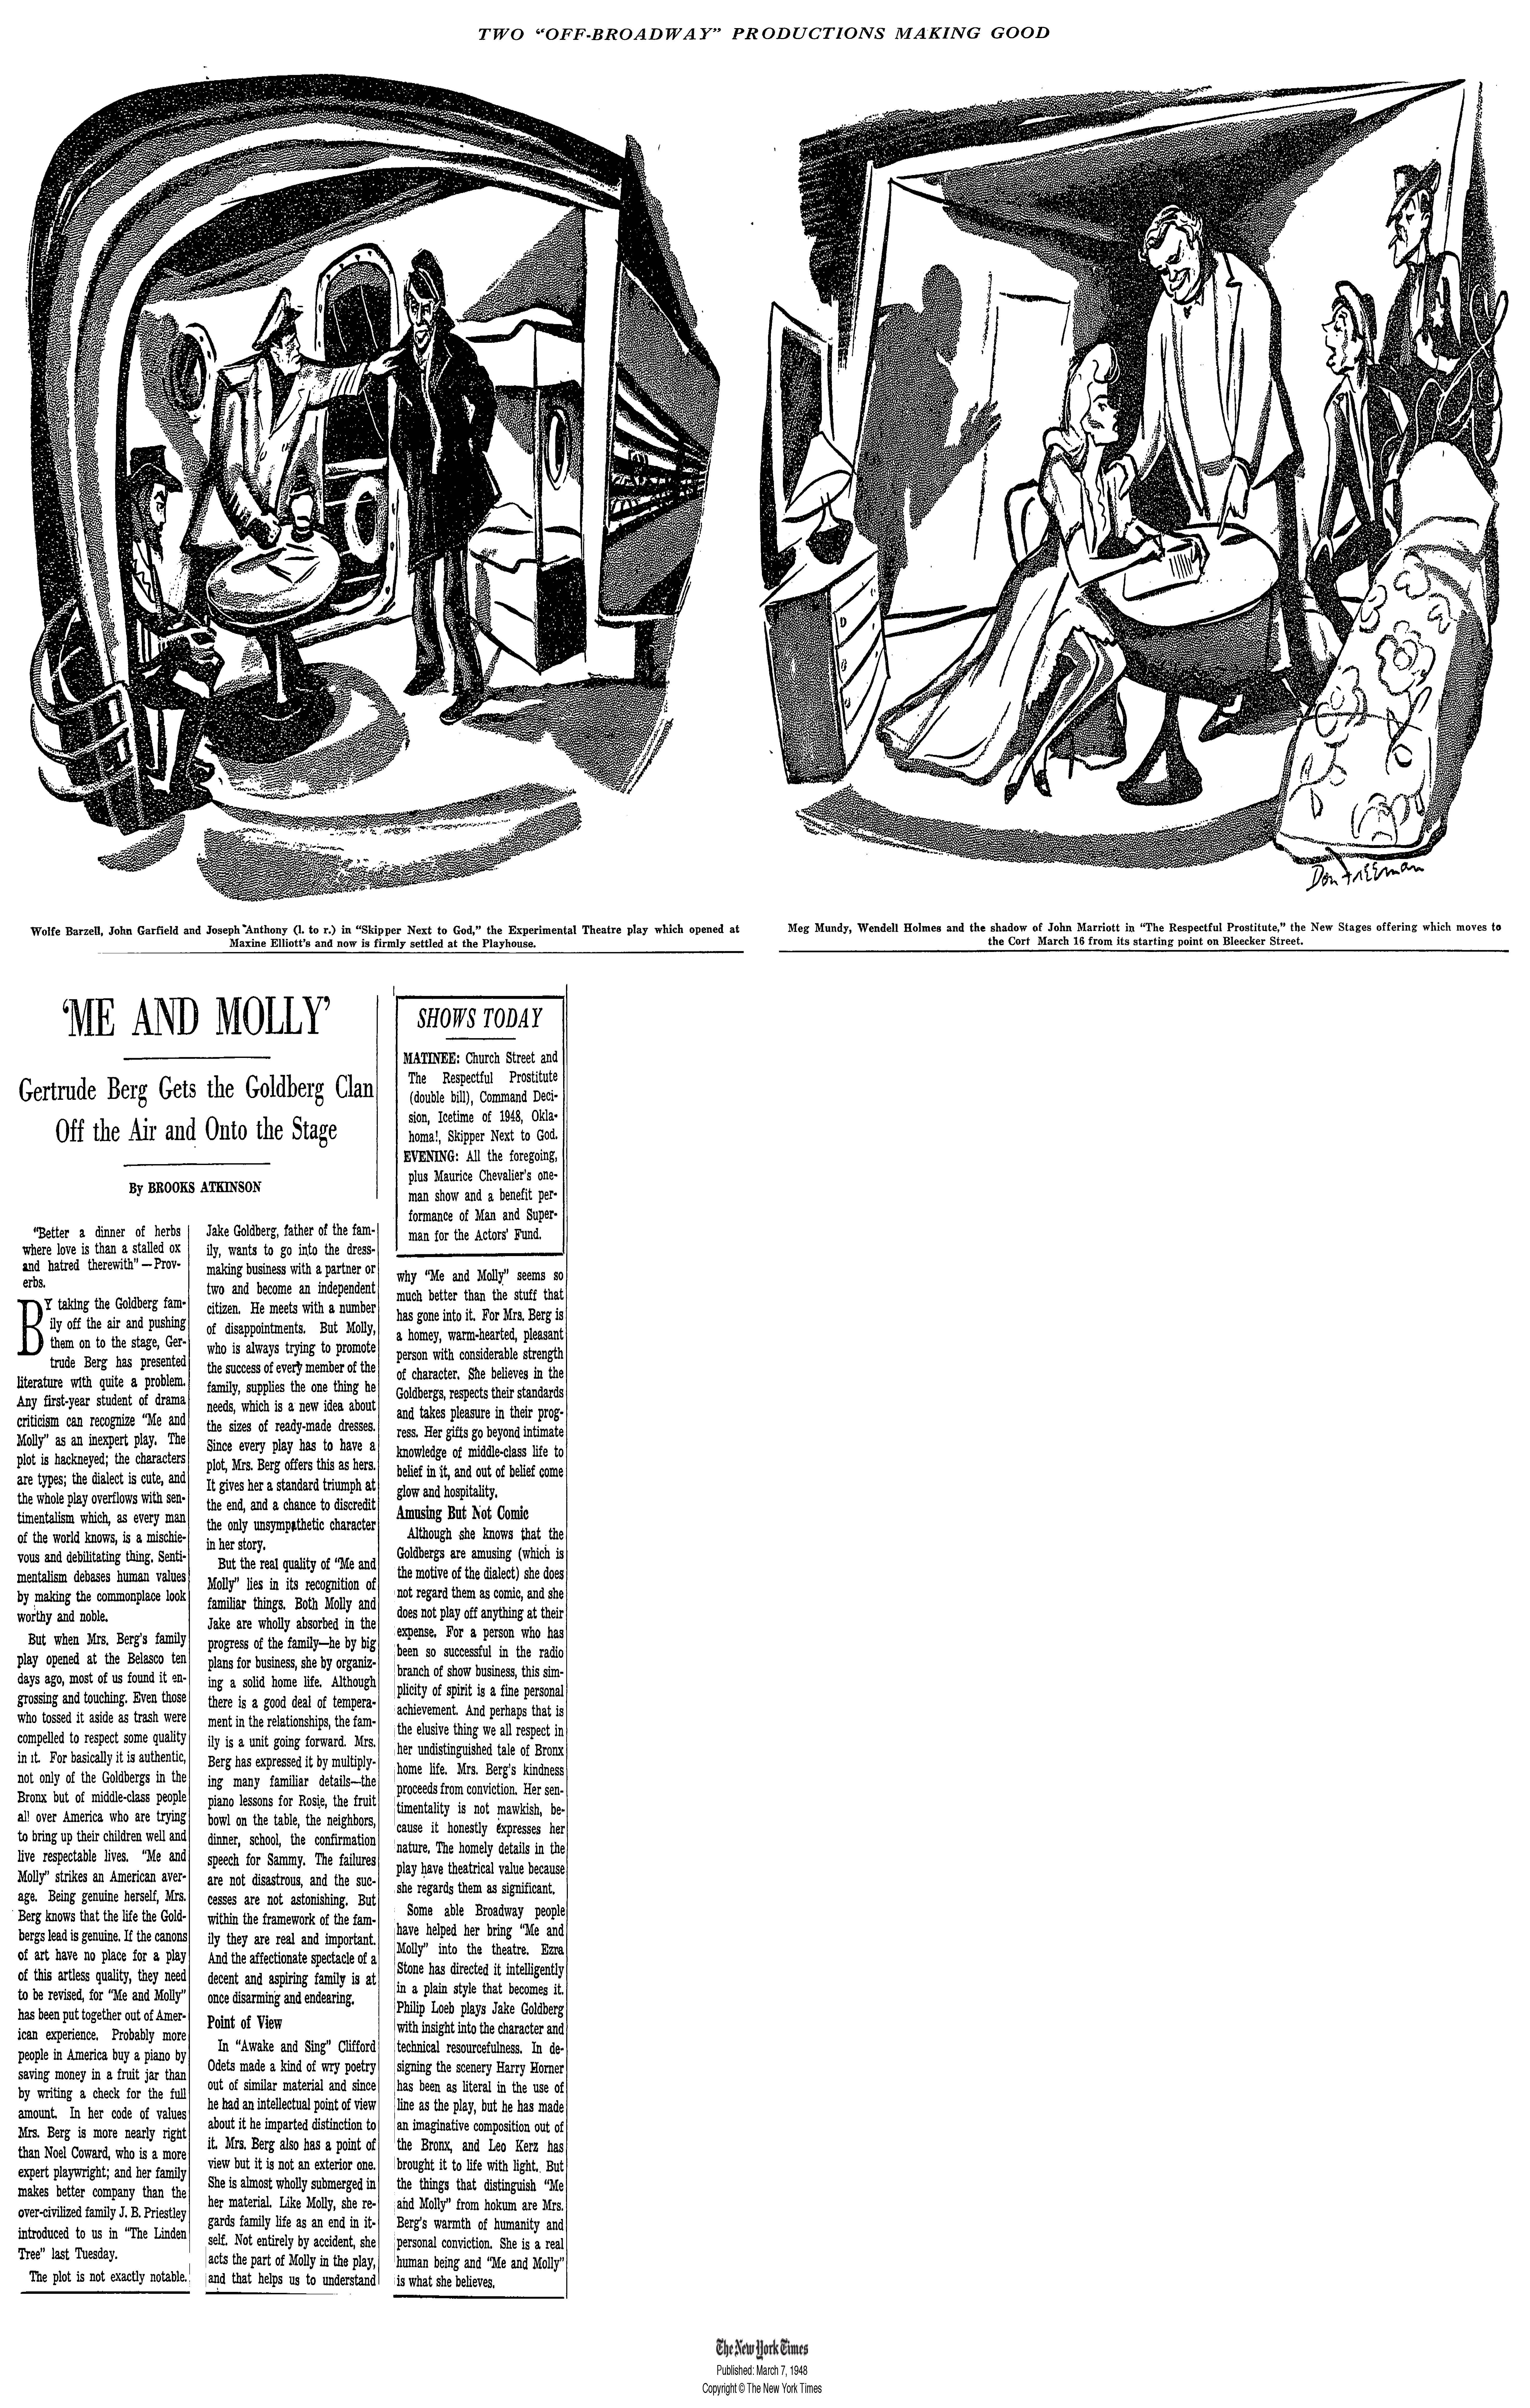 New York Times, March 7, 1948